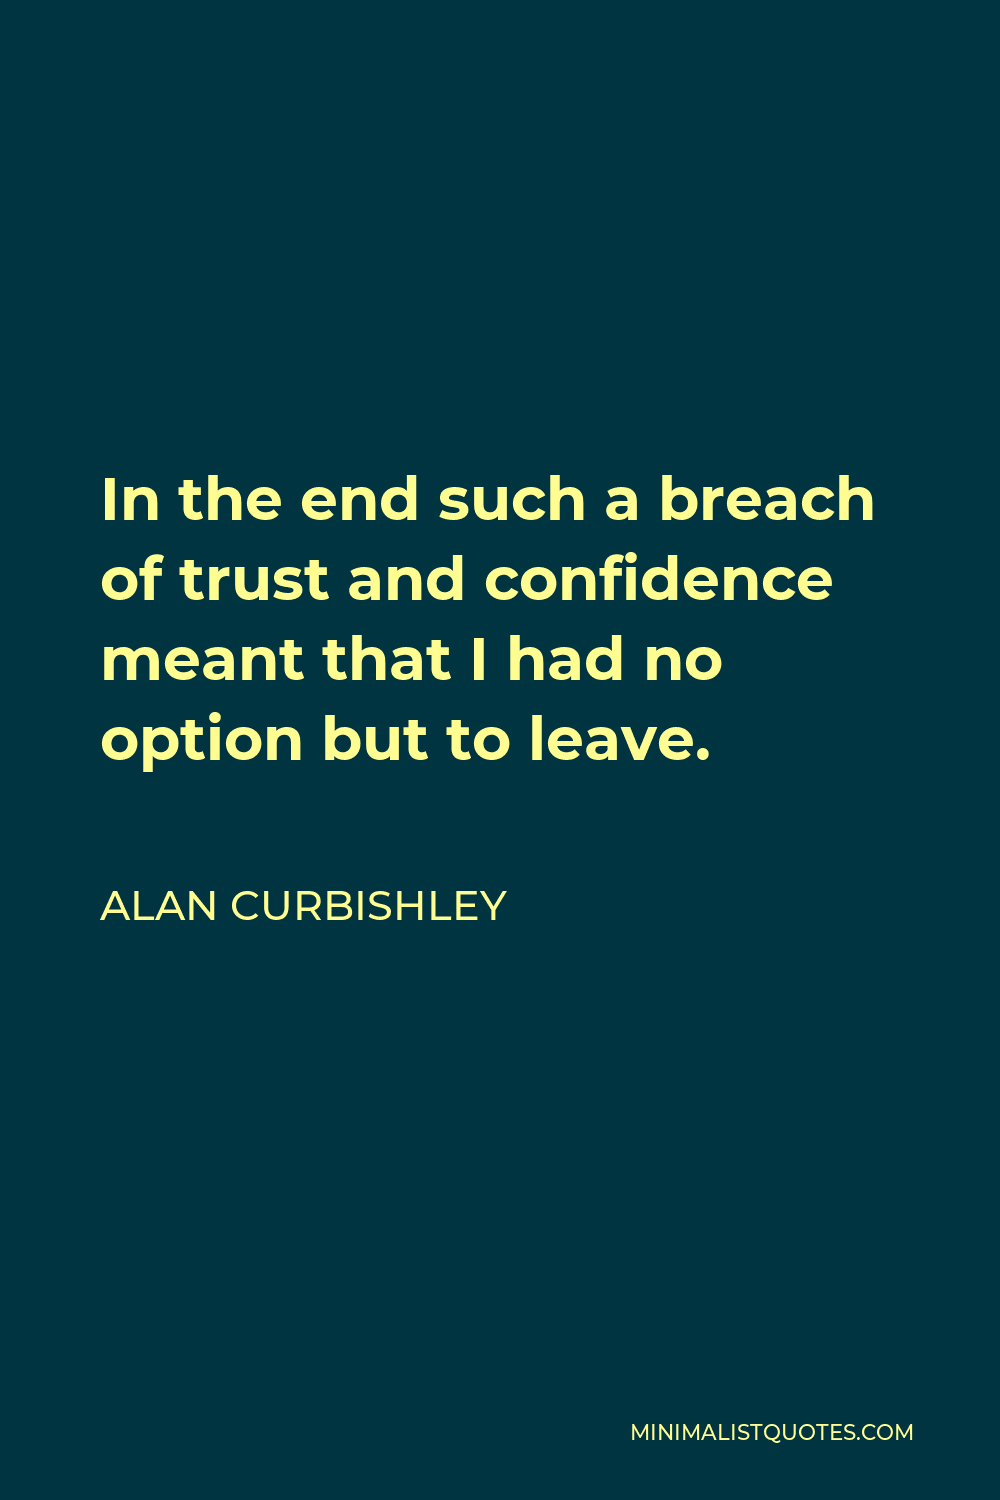 Alan Curbishley Quote - In the end such a breach of trust and confidence meant that I had no option but to leave.